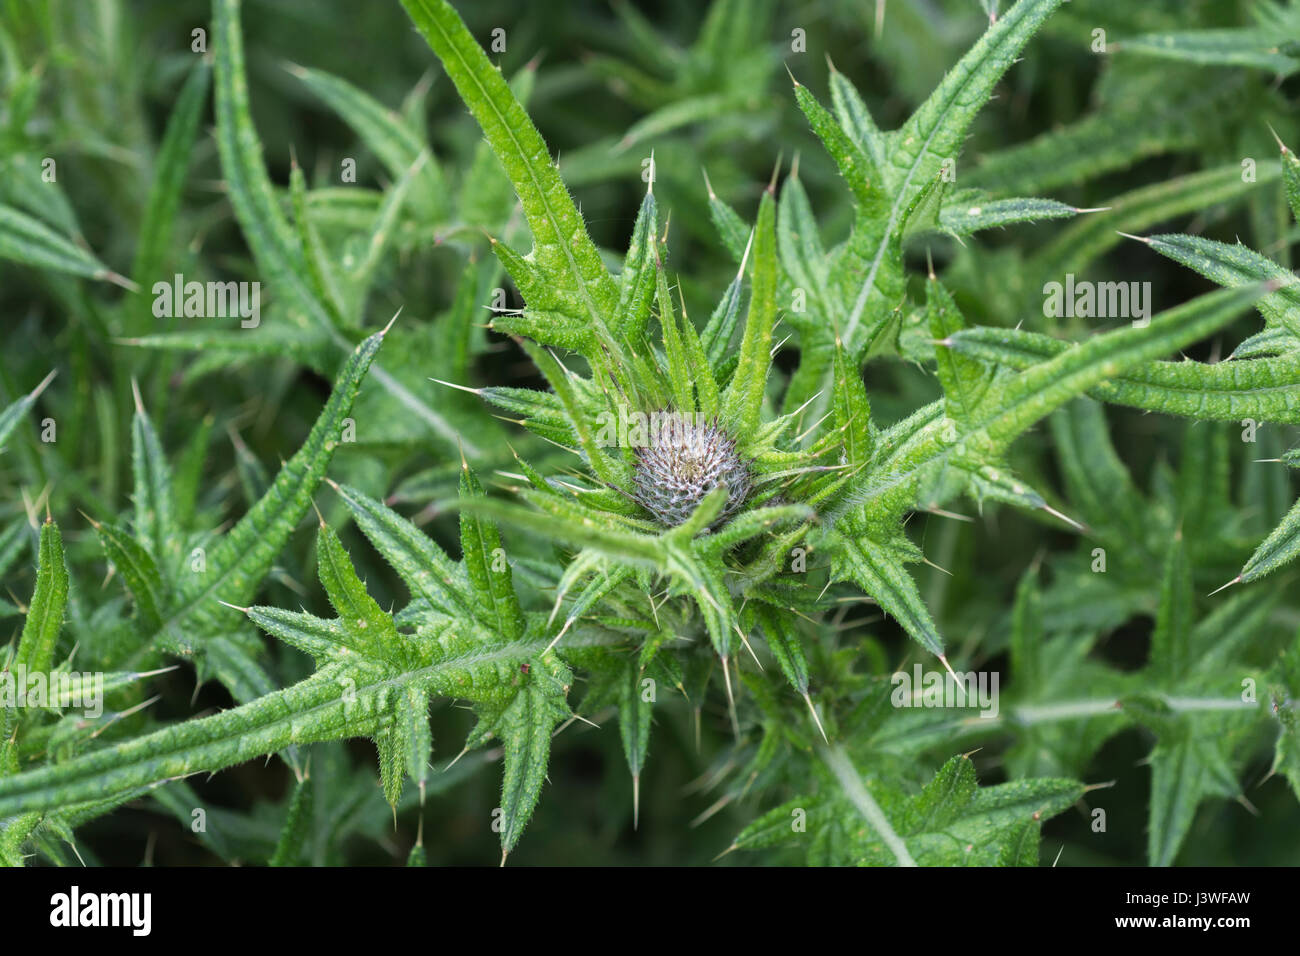 Flower bud and upper leaves of Spear Thistle / Bull Thistle / Cirsium vulgare. Possible metaphor for pain / painful / sharp. Stock Photo